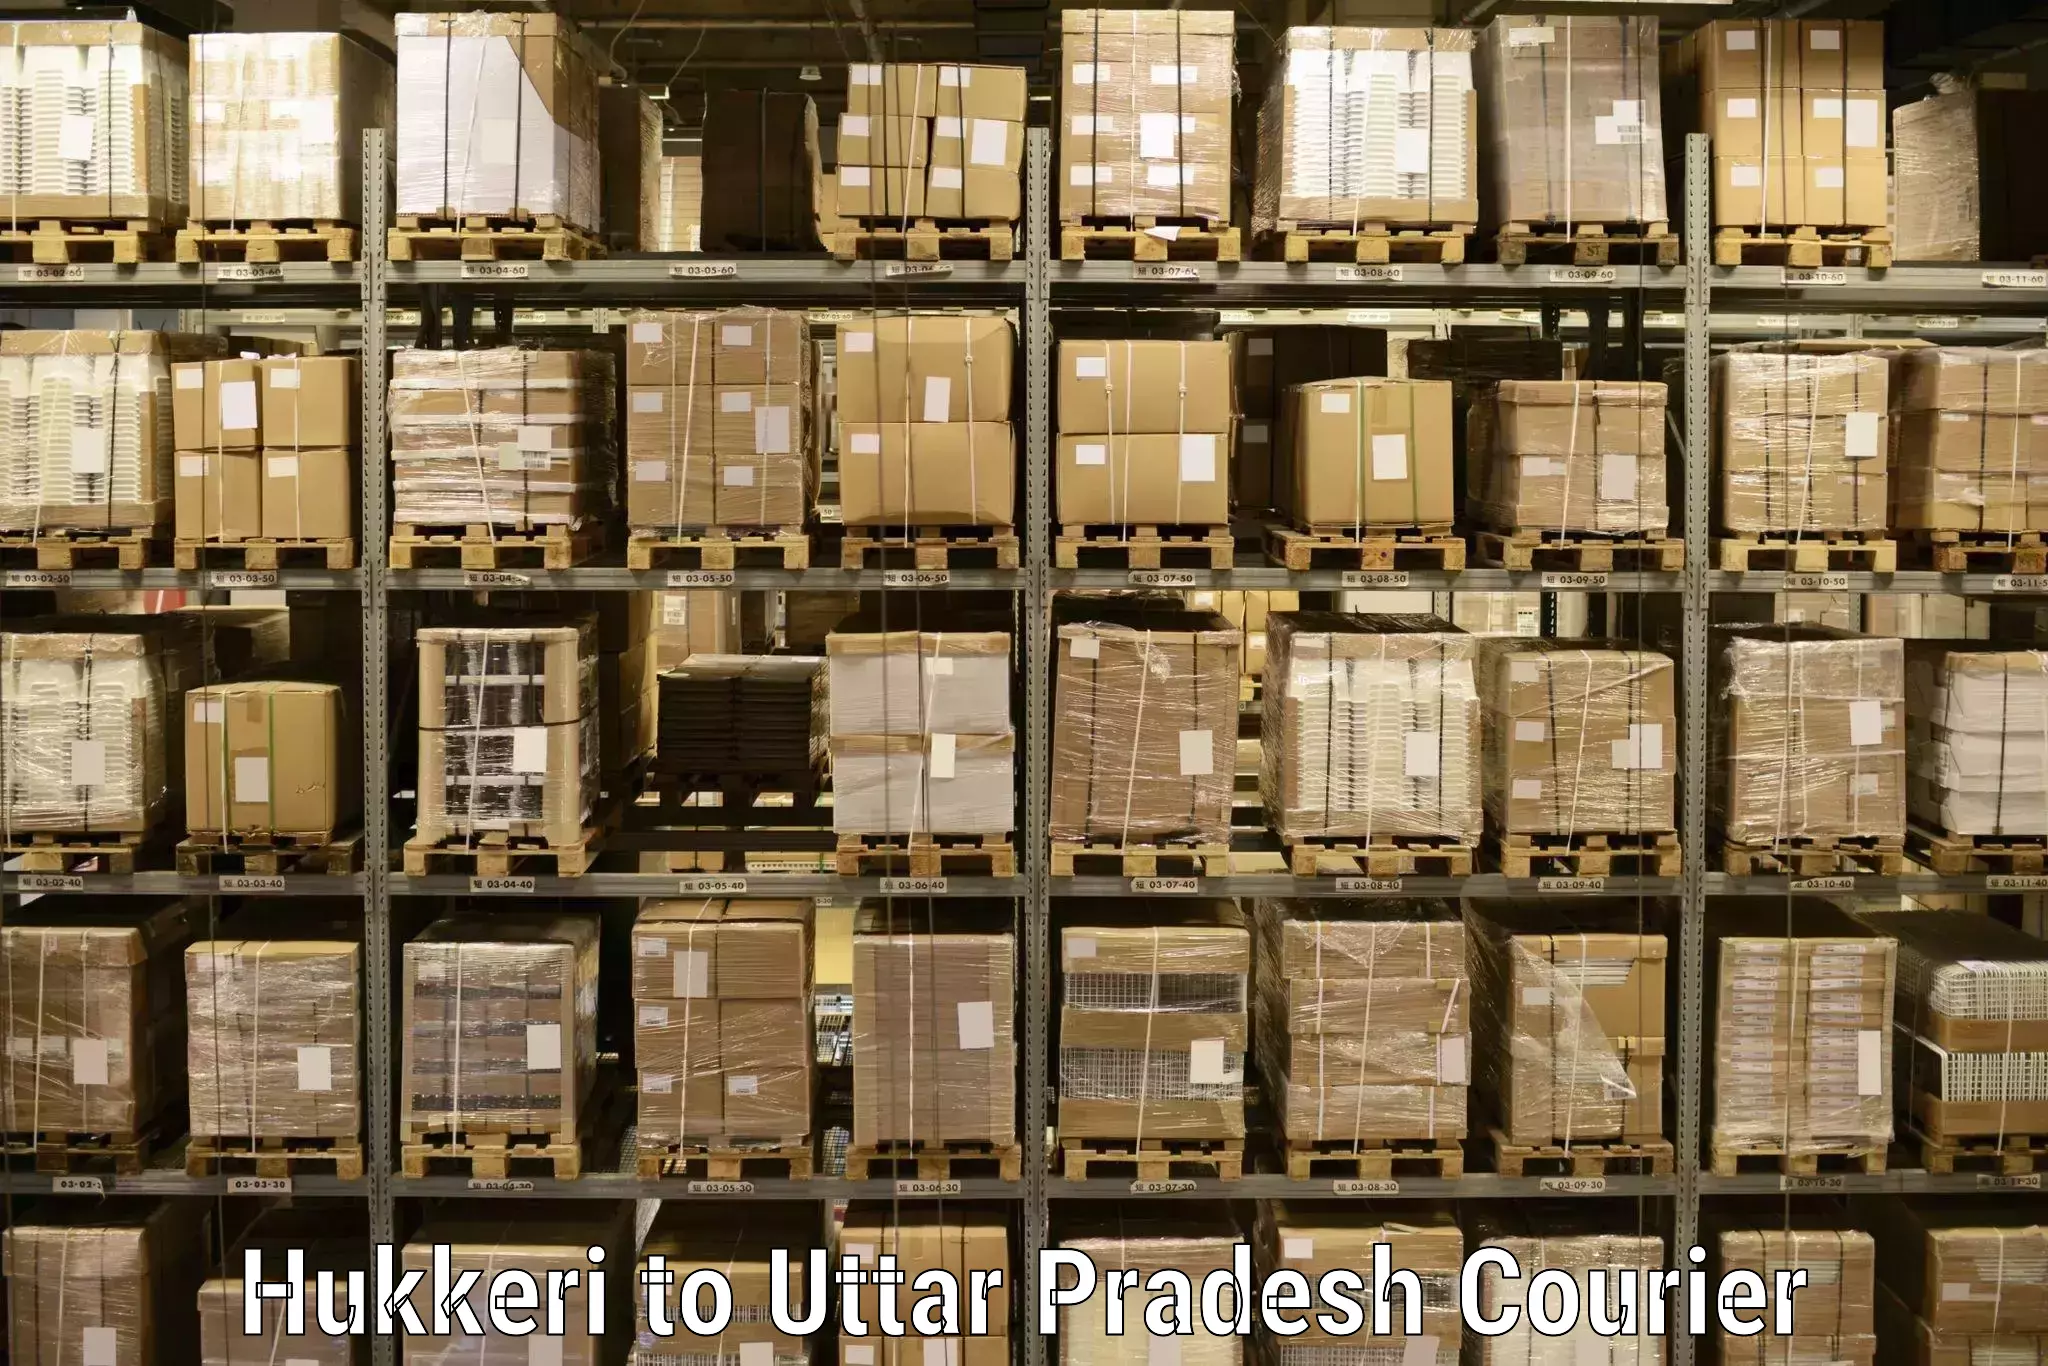 Customer-oriented courier services Hukkeri to Badlapur